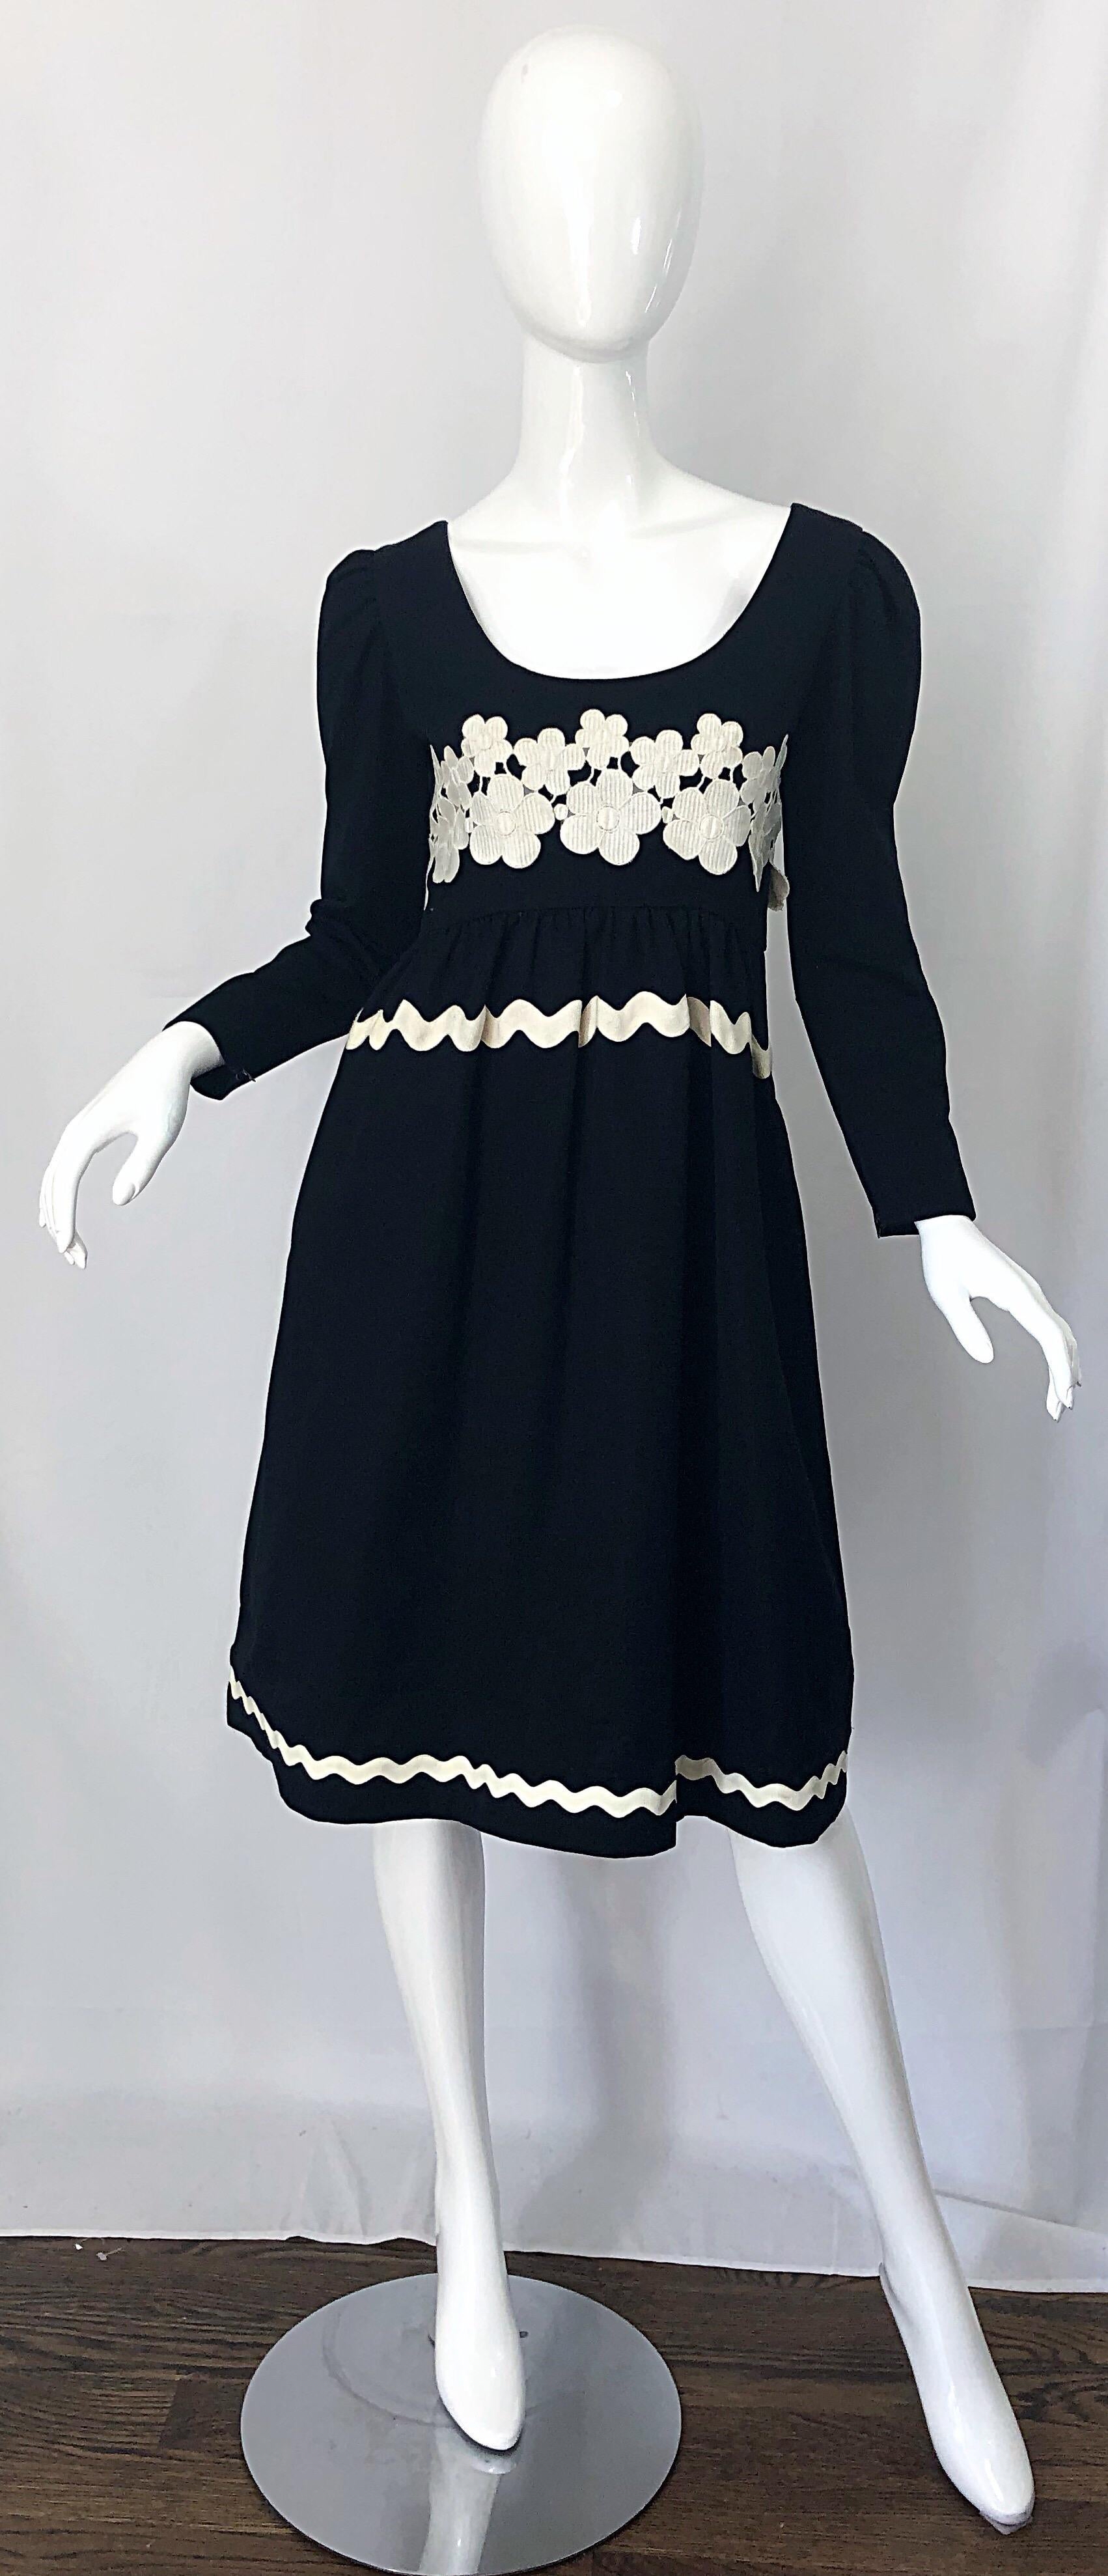 Chic vintage 1960s OSCAR DE LA RENTA black and white / ivory long sleeve silk A - Line dress! Features flowers embroidered / crochet at the bust, with flattering rickrack detail at waistband and hem. Slight puff sleeves add just the right amount of